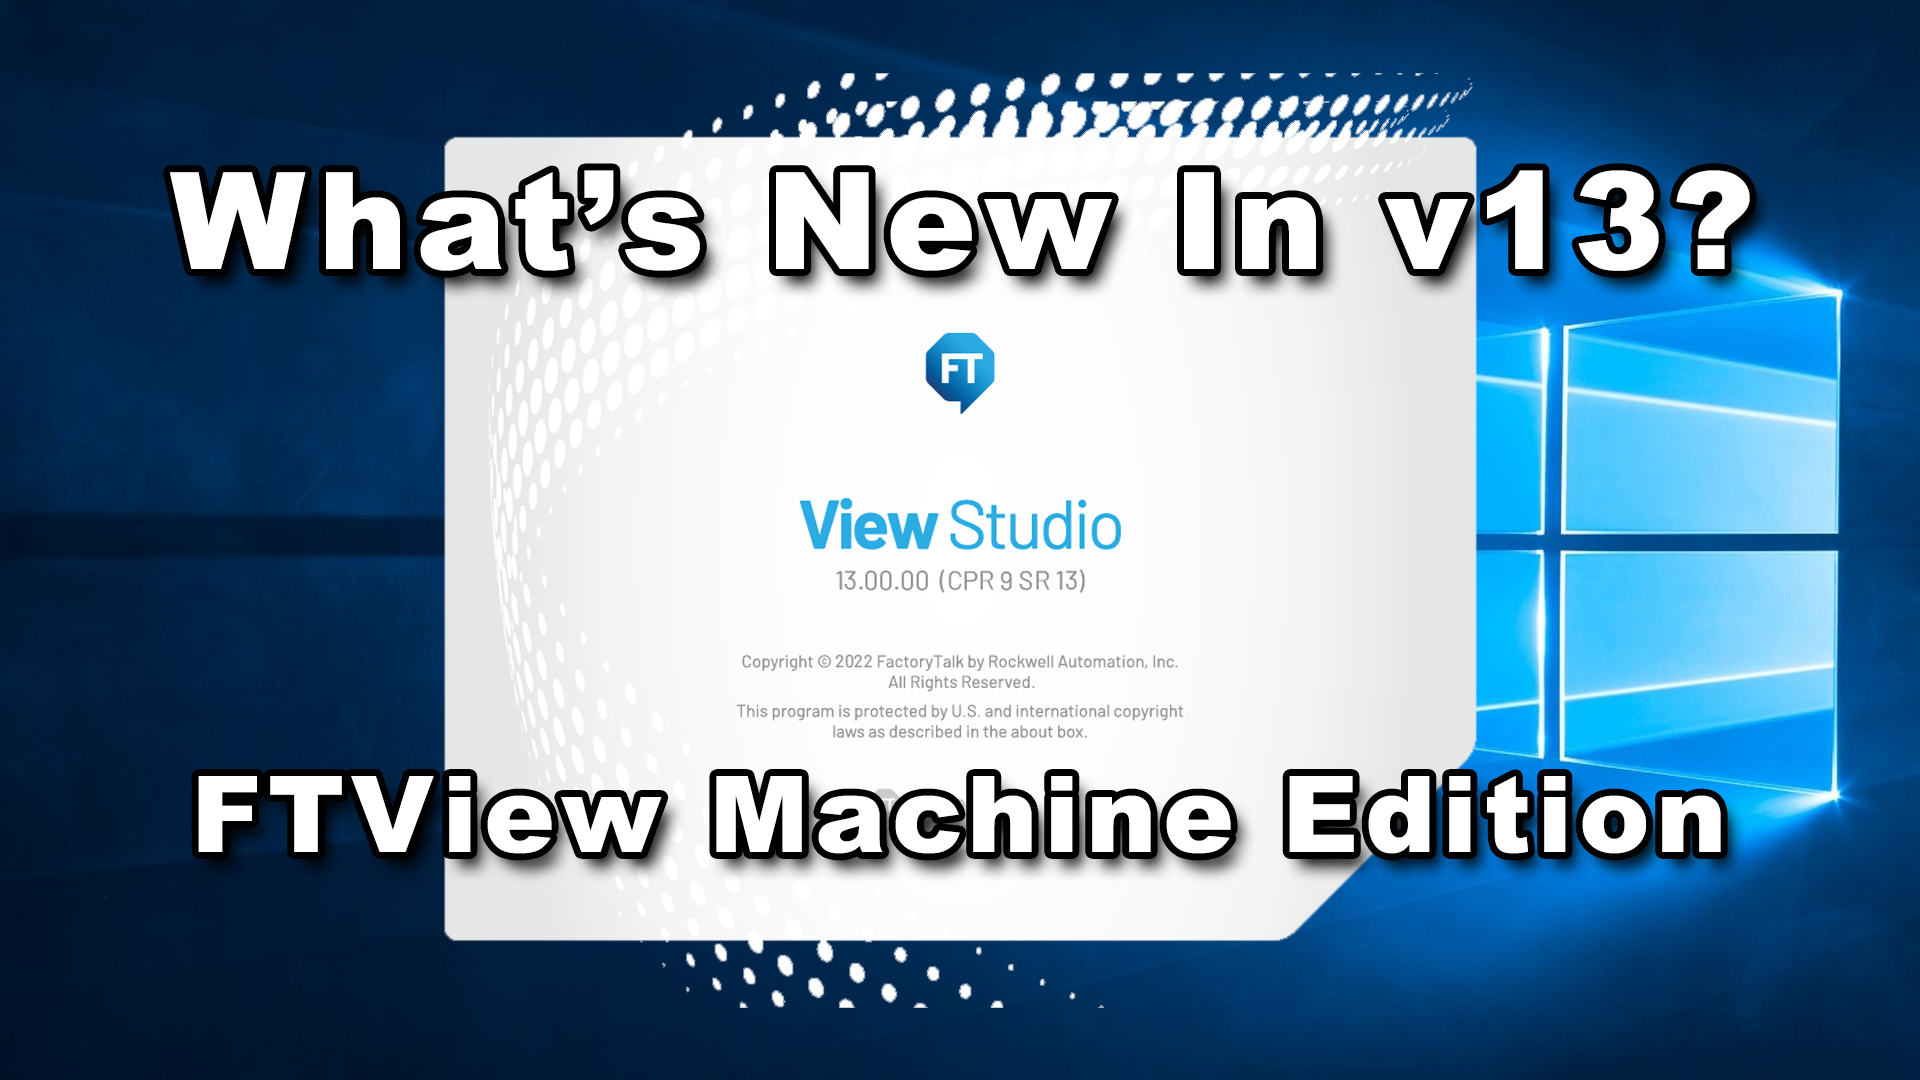 What's New In FactoryTalk View Machine Edition v13